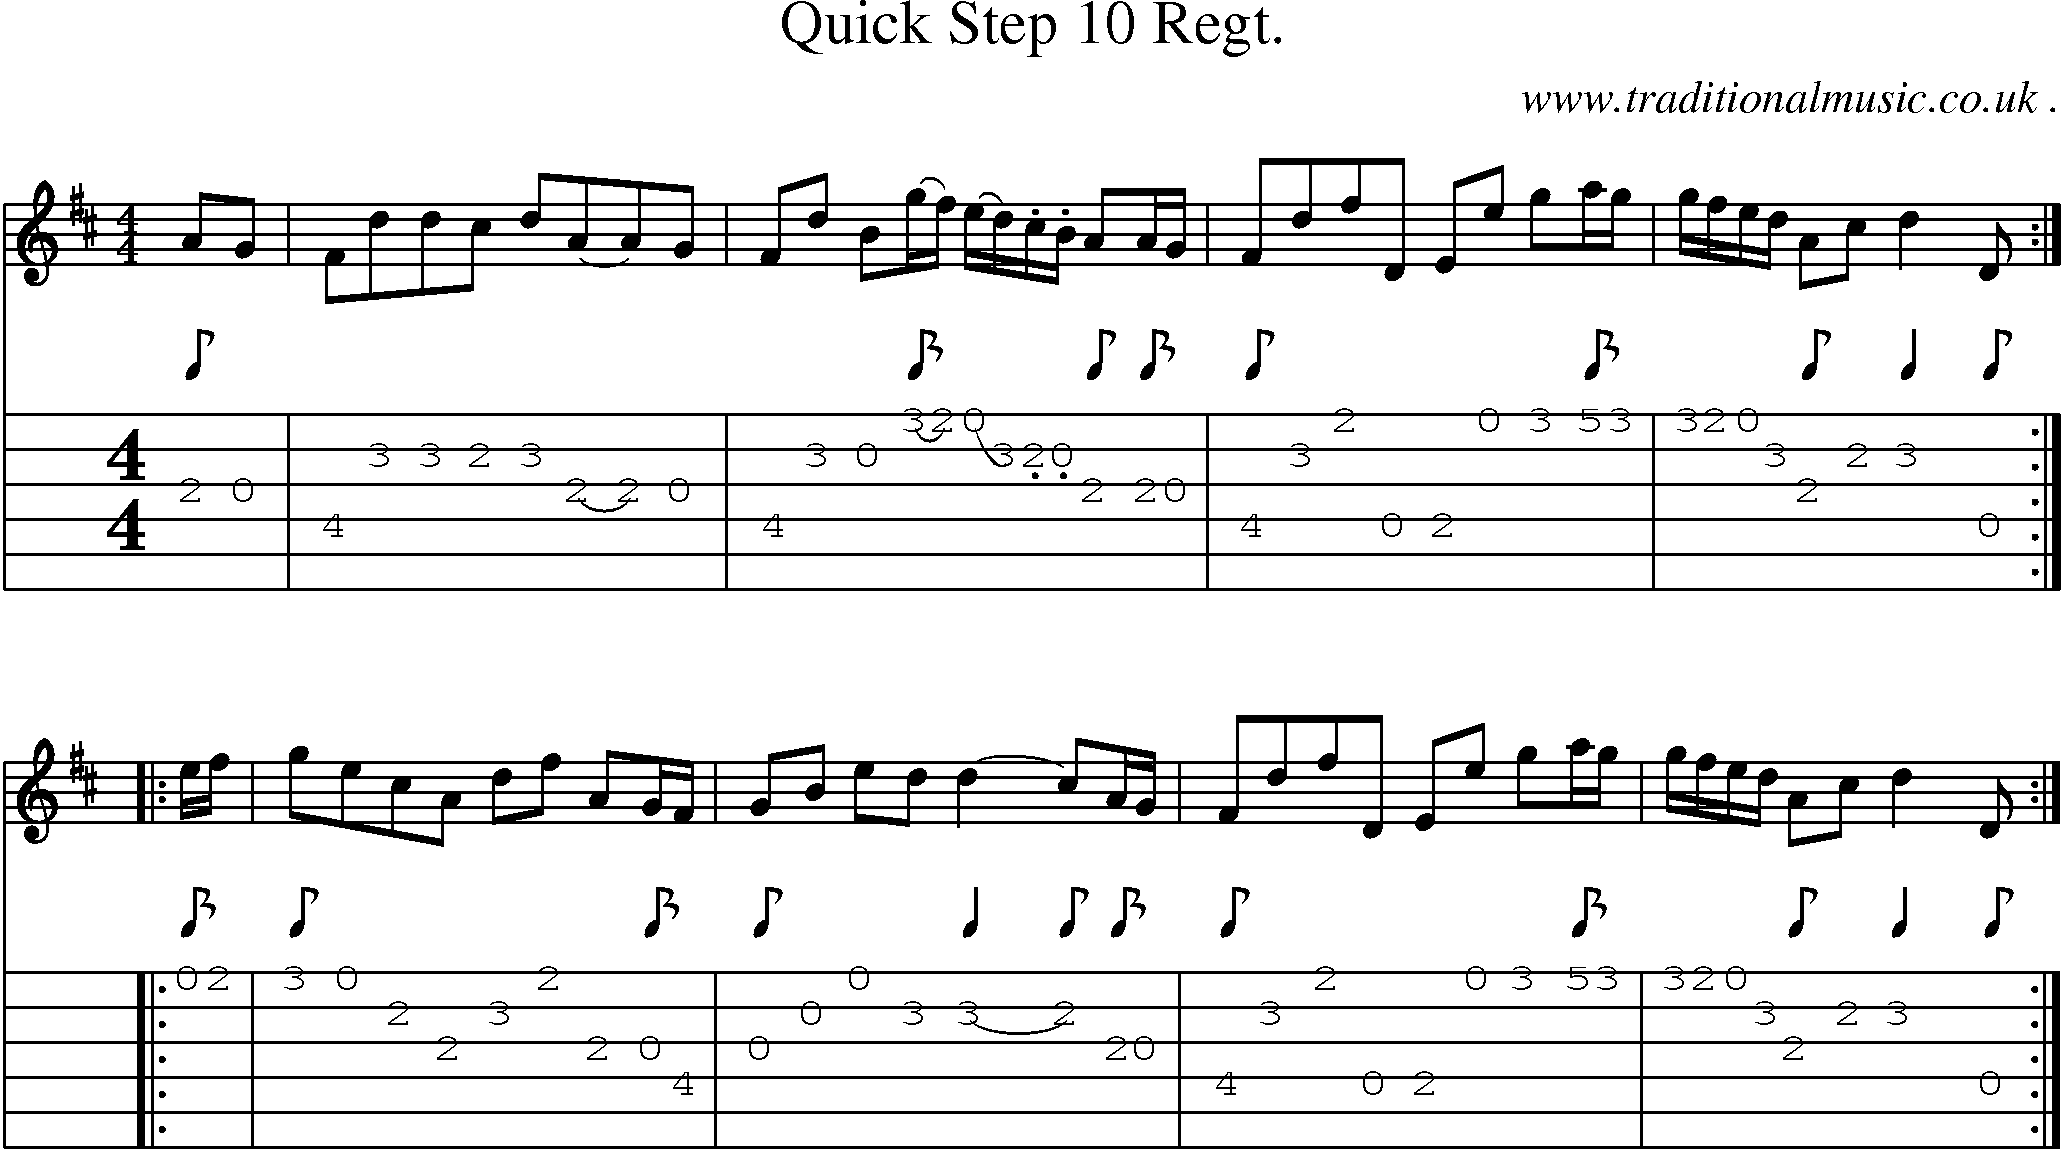 Sheet-music  score, Chords and Guitar Tabs for Quick Step 10 Regt